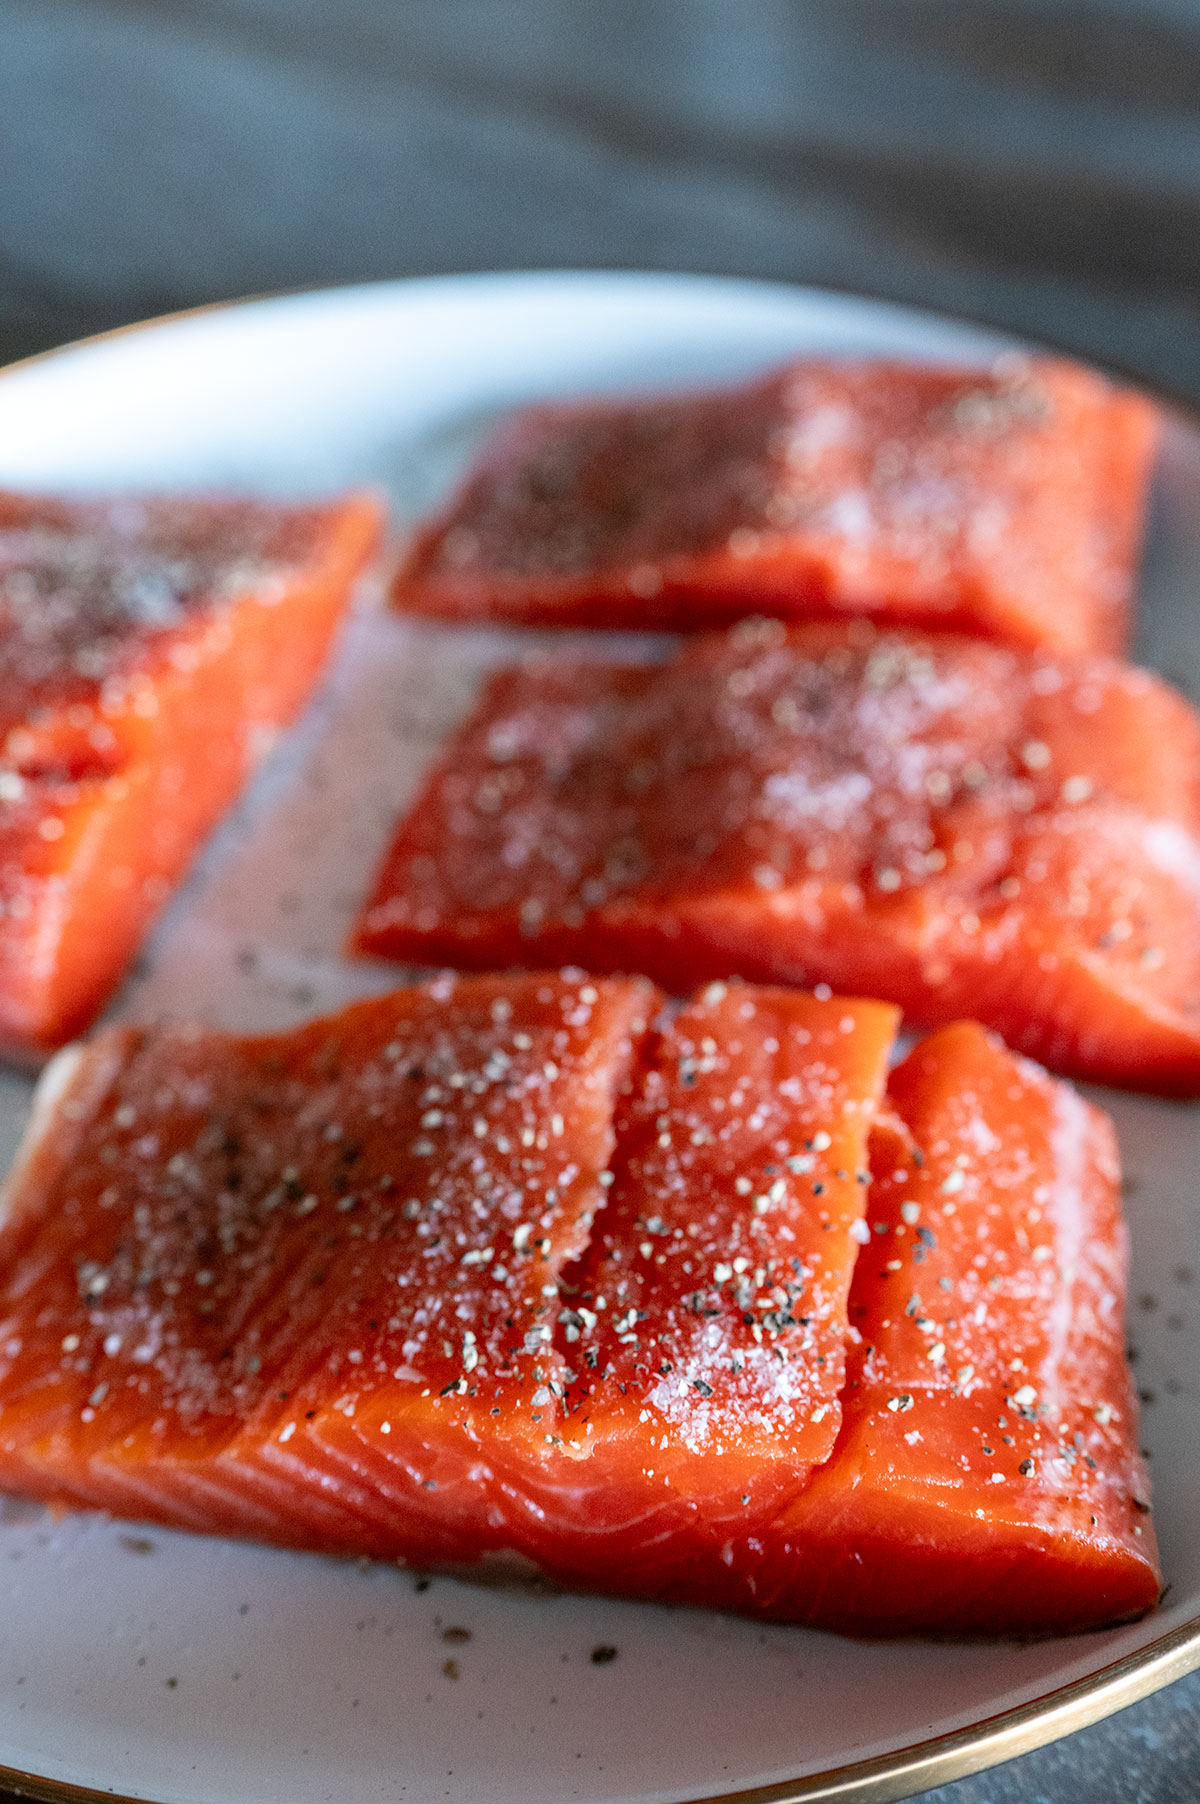 Salmon filets seasoned with salt and pepper.